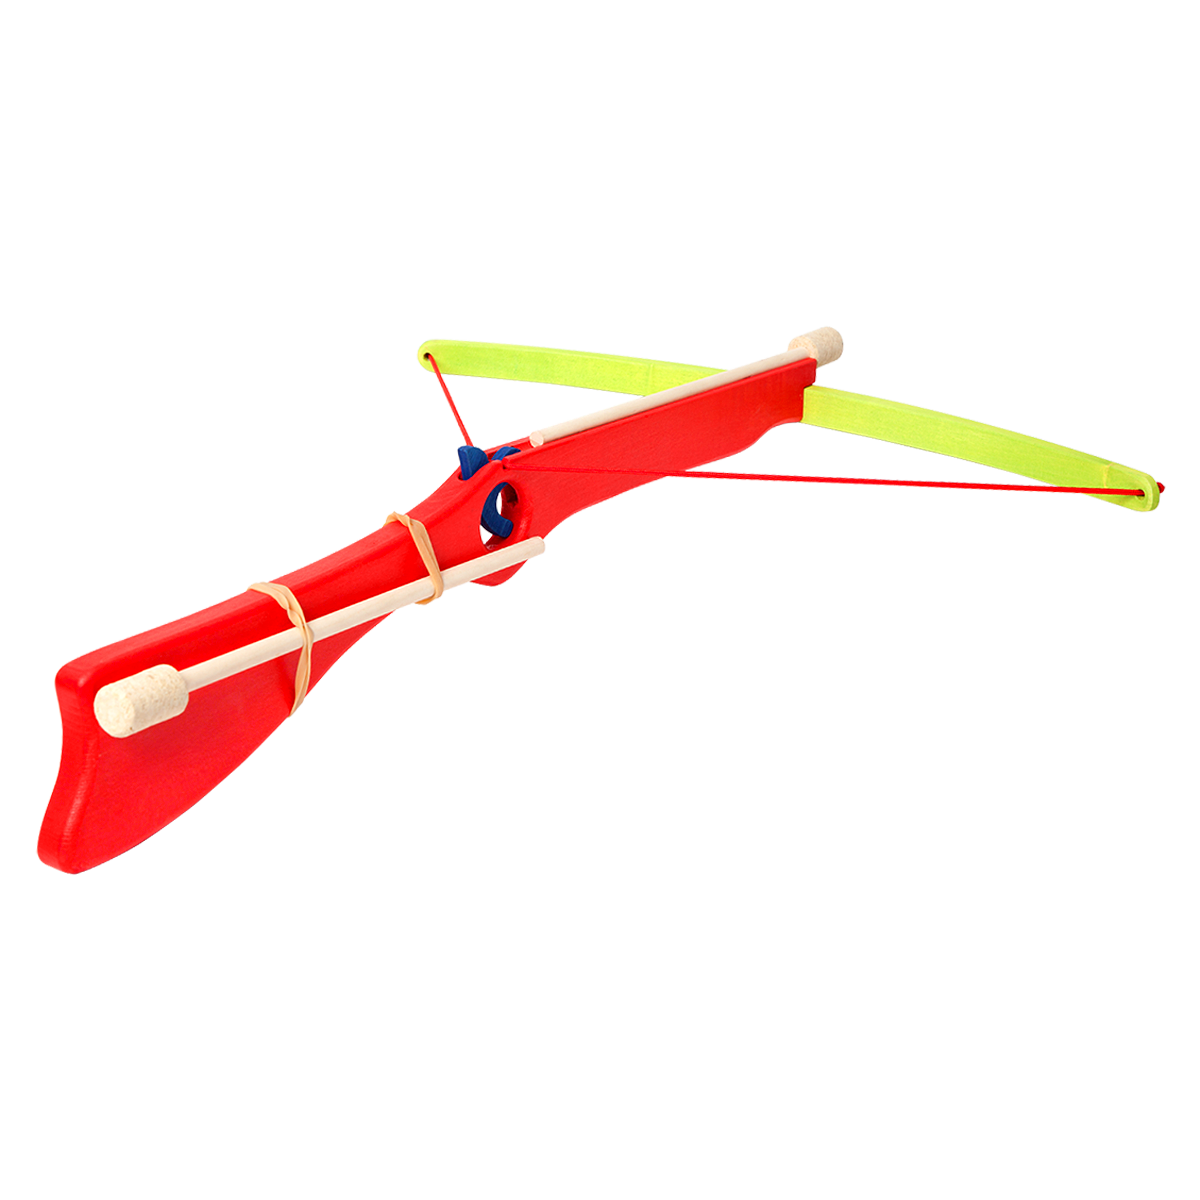 Red wooden toy crossbow with cork arrows